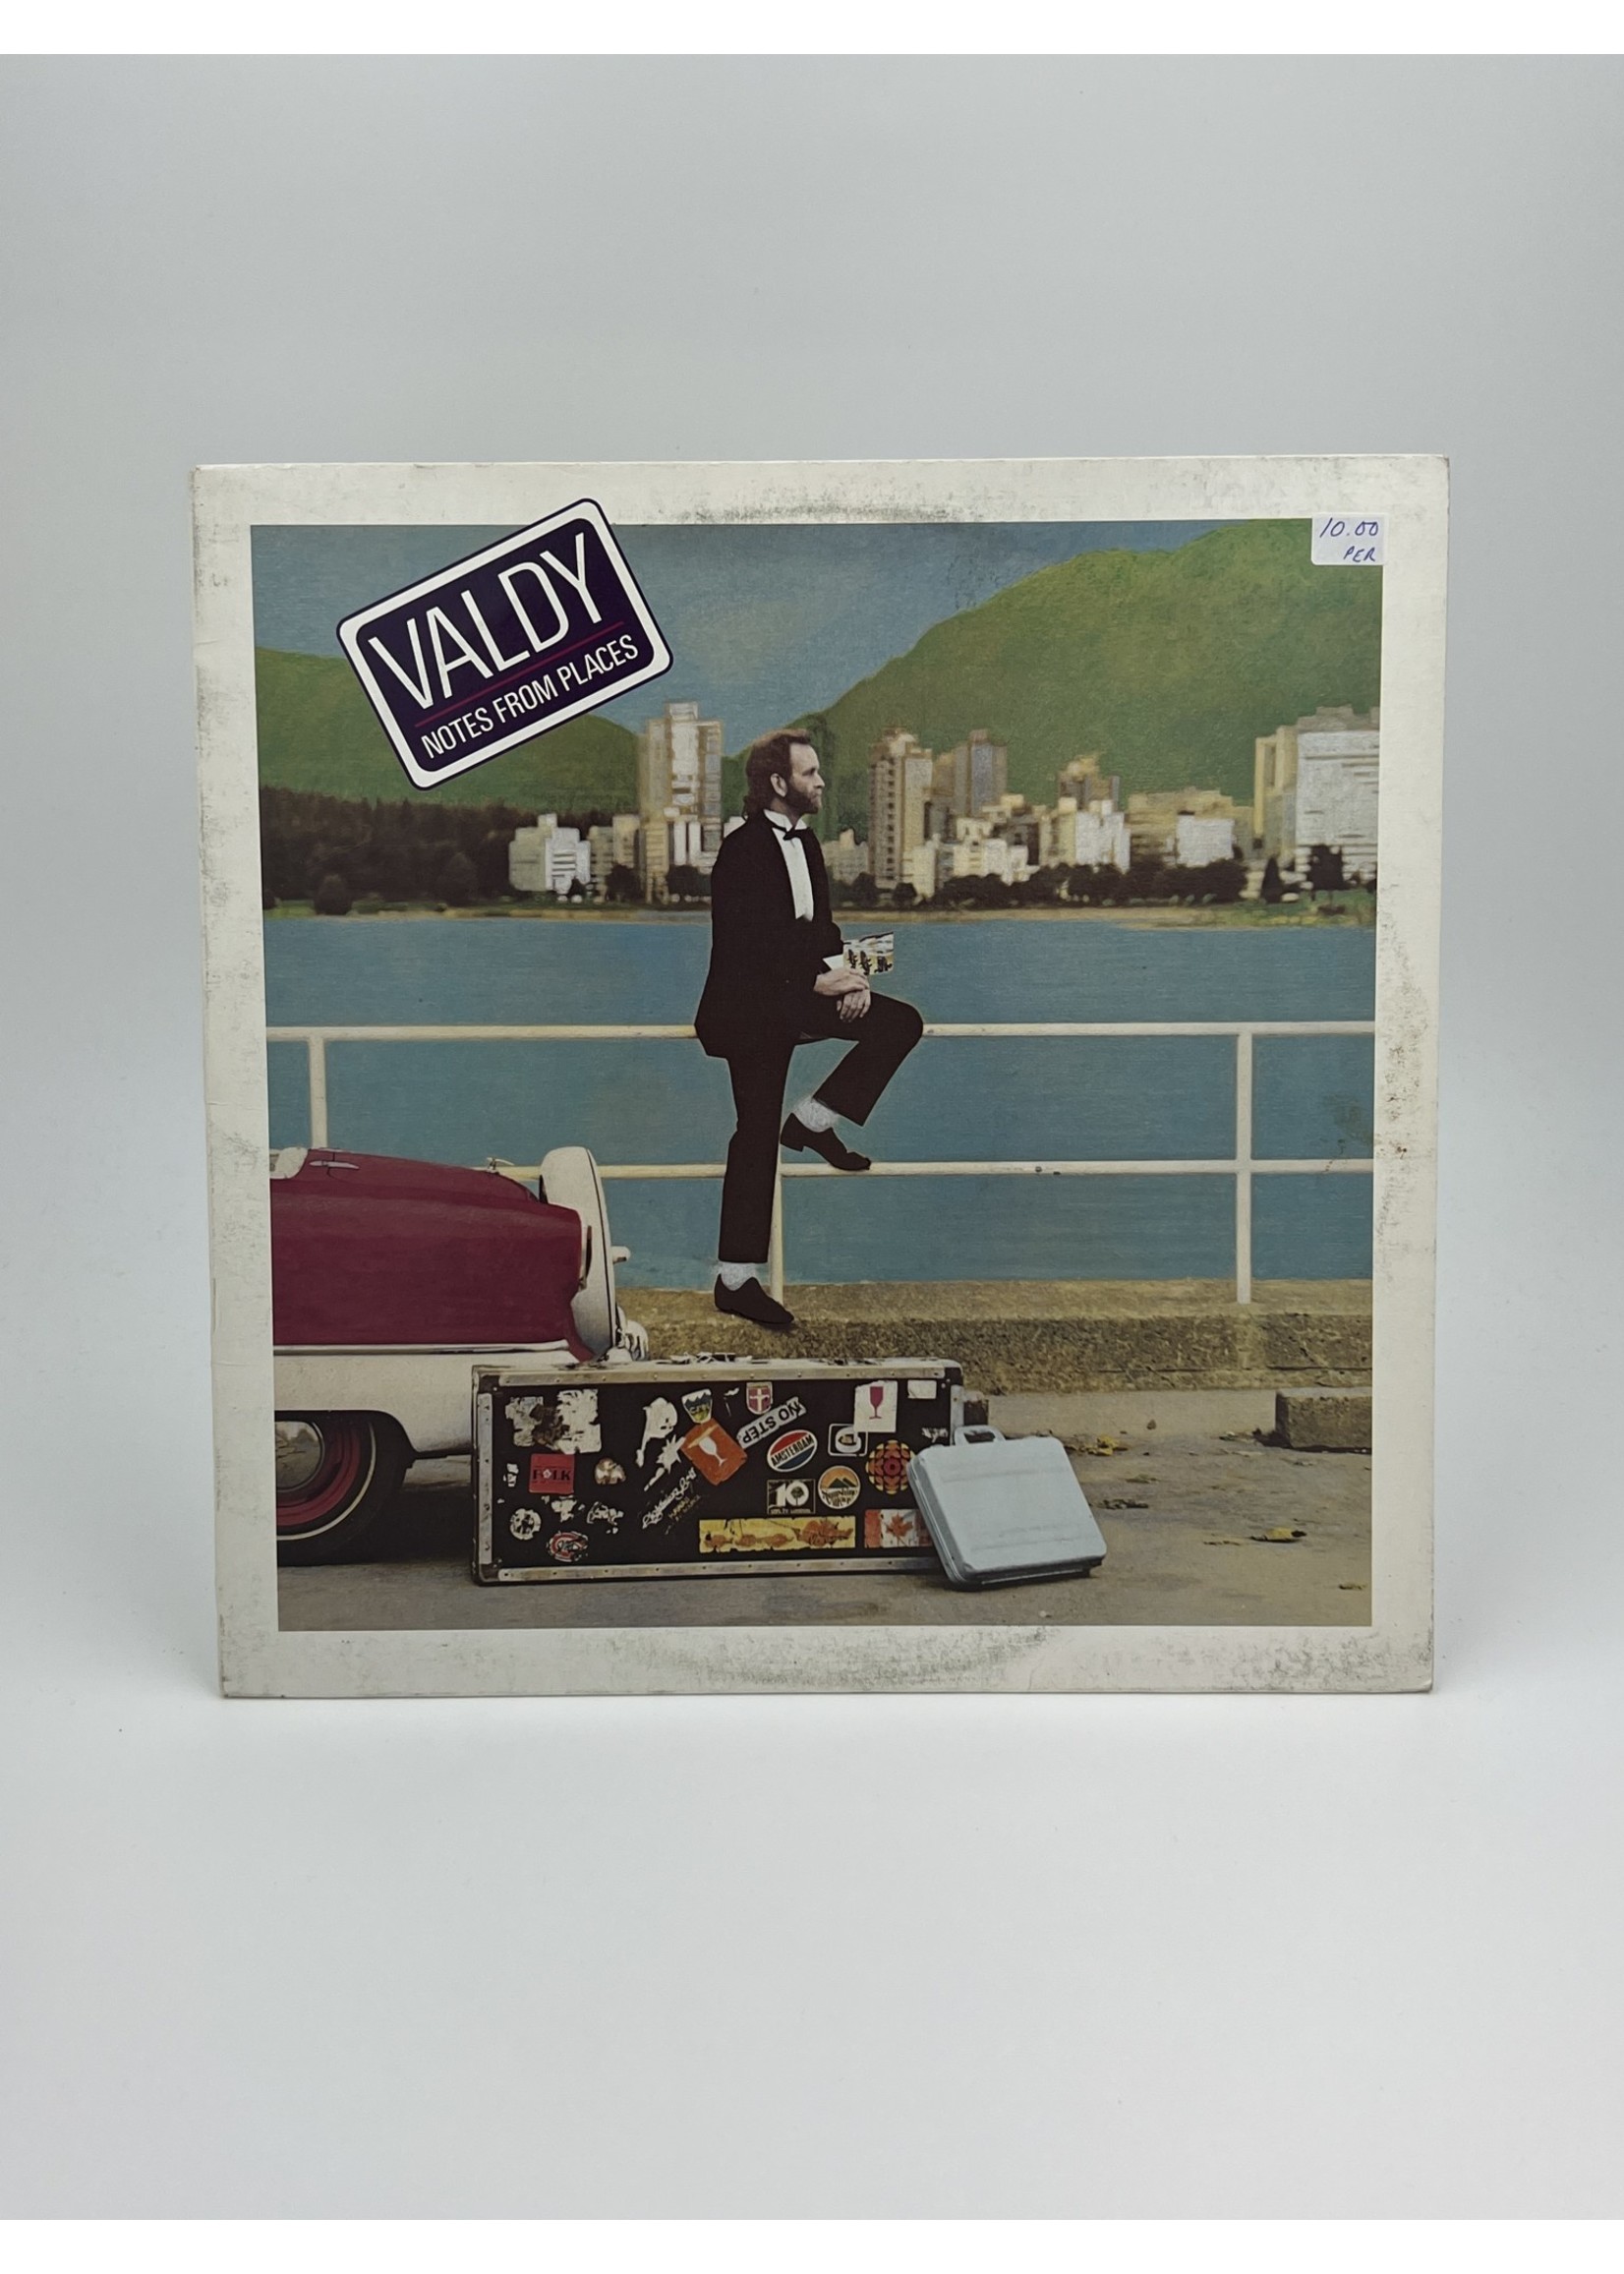 LP Valdy Notes From Places LP Record